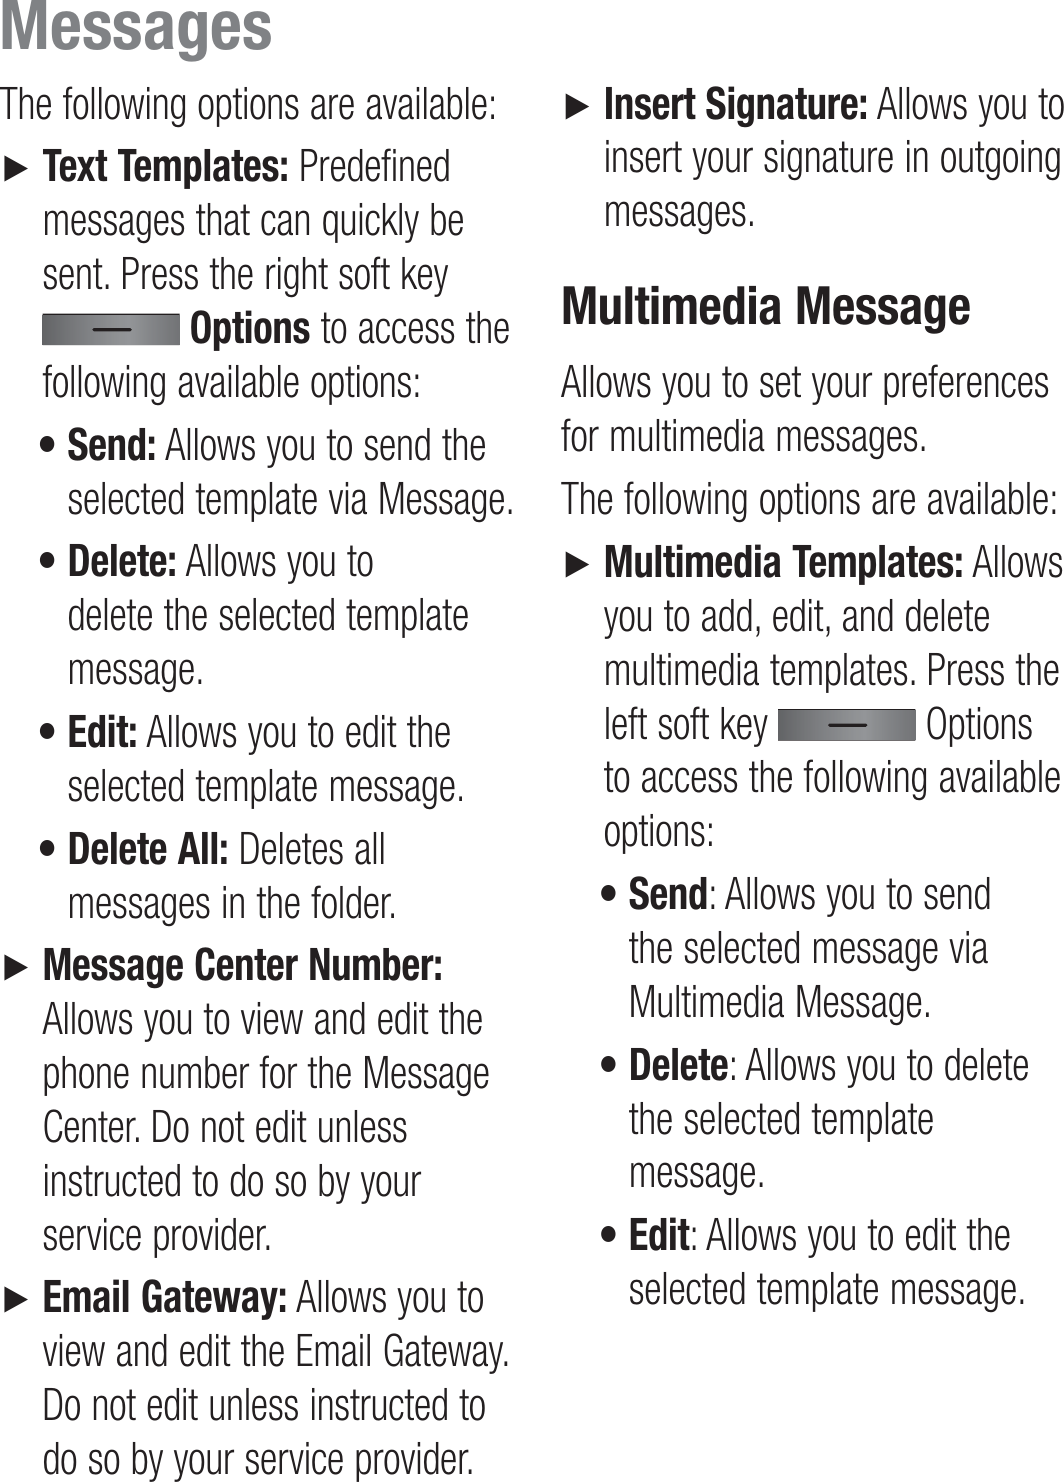 The following options are available:►   Text Templates: Predefined messages that can quickly be sent. Press the right soft key  Options to access the following available options: •  Send: Allows you to send the selected template via Message. •  Delete: Allows you to delete the selected template message. •  Edit: Allows you to edit the selected template message. •  Delete All: Deletes all messages in the folder.►   Message Center Number: Allows you to view and edit the phone number for the Message Center. Do not edit unless instructed to do so by your service provider.►   Email Gateway: Allows you to view and edit the Email Gateway. Do not edit unless instructed to do so by your service provider.►   Insert Signature: Allows you to insert your signature in outgoing messages.Multimedia MessageAllows you to set your preferences for multimedia messages.The following options are available:►   Multimedia Templates: Allows you to add, edit, and delete multimedia templates. Press the left soft key   Options to access the following available options: •  Send: Allows you to send the selected message via Multimedia Message. •  Delete: Allows you to delete the selected template message. •  Edit: Allows you to edit the selected template message.Messages